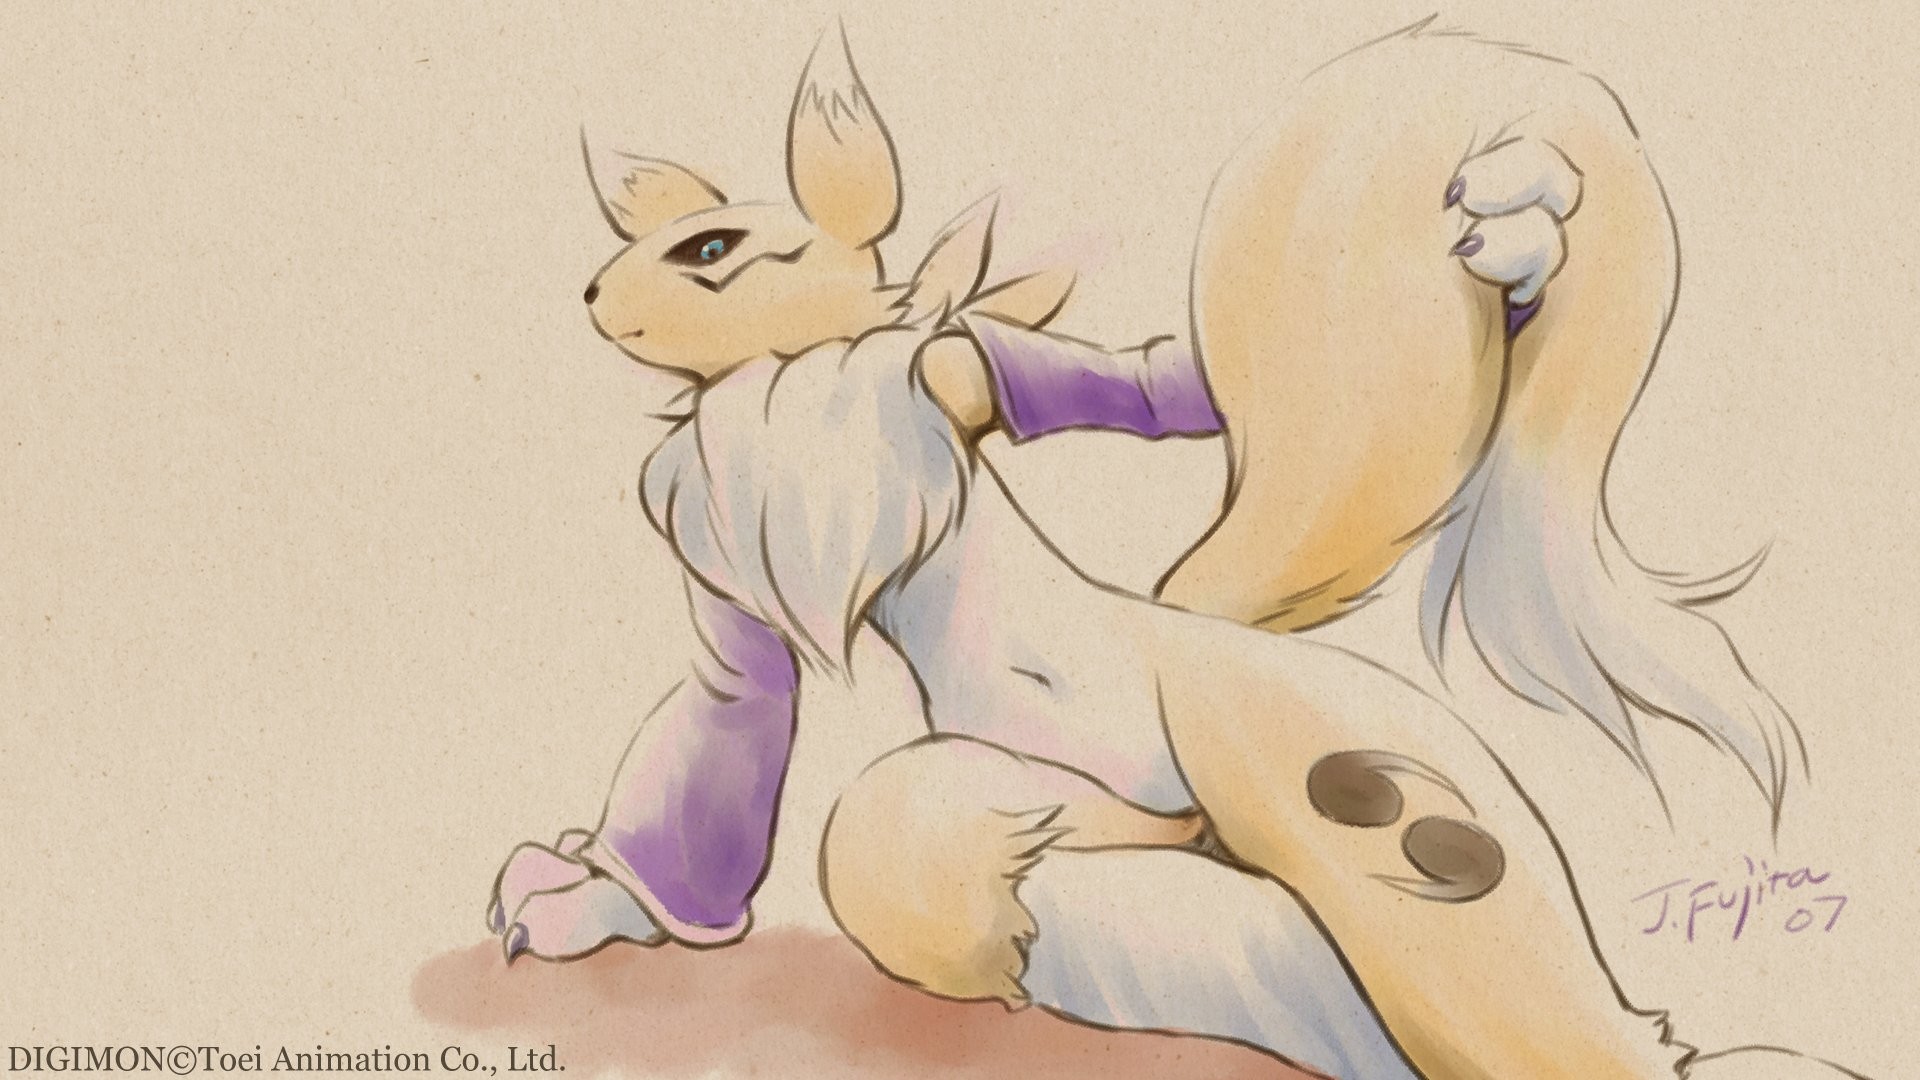 Anime 1920x1080 Renamon Digimon anime watermarked simple background furry signature 2007 (Year) minimalism tail claws